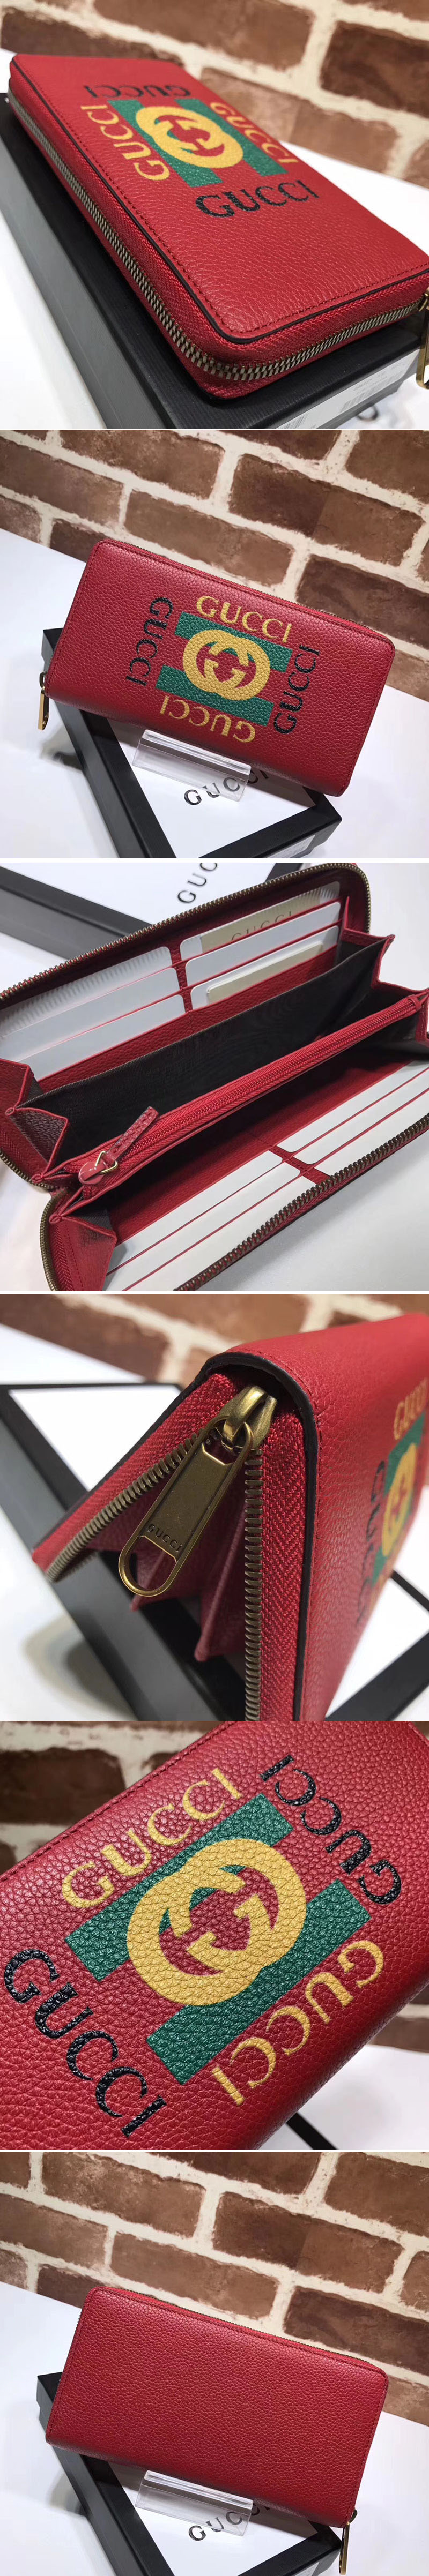 Replica Gucci 496317 logo leather zip around wallet Red